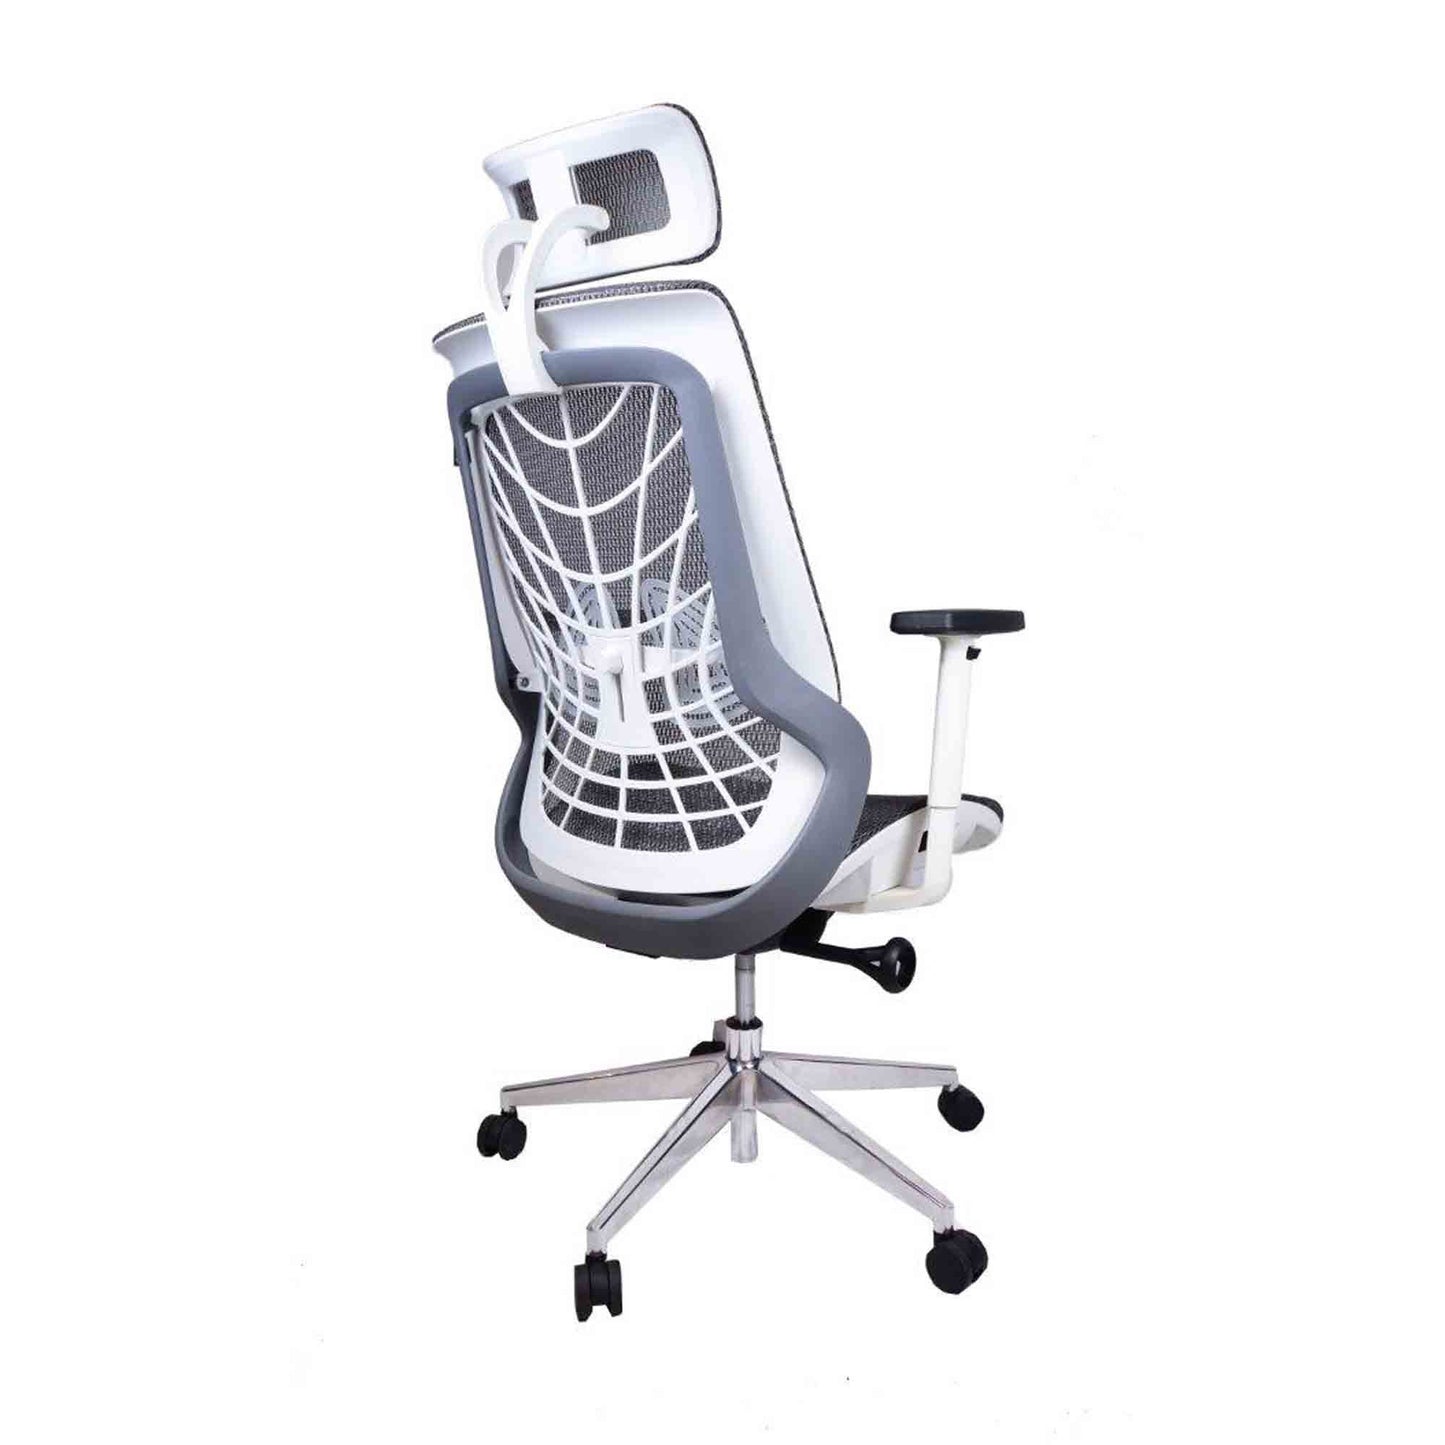 Office Chair - mch0034